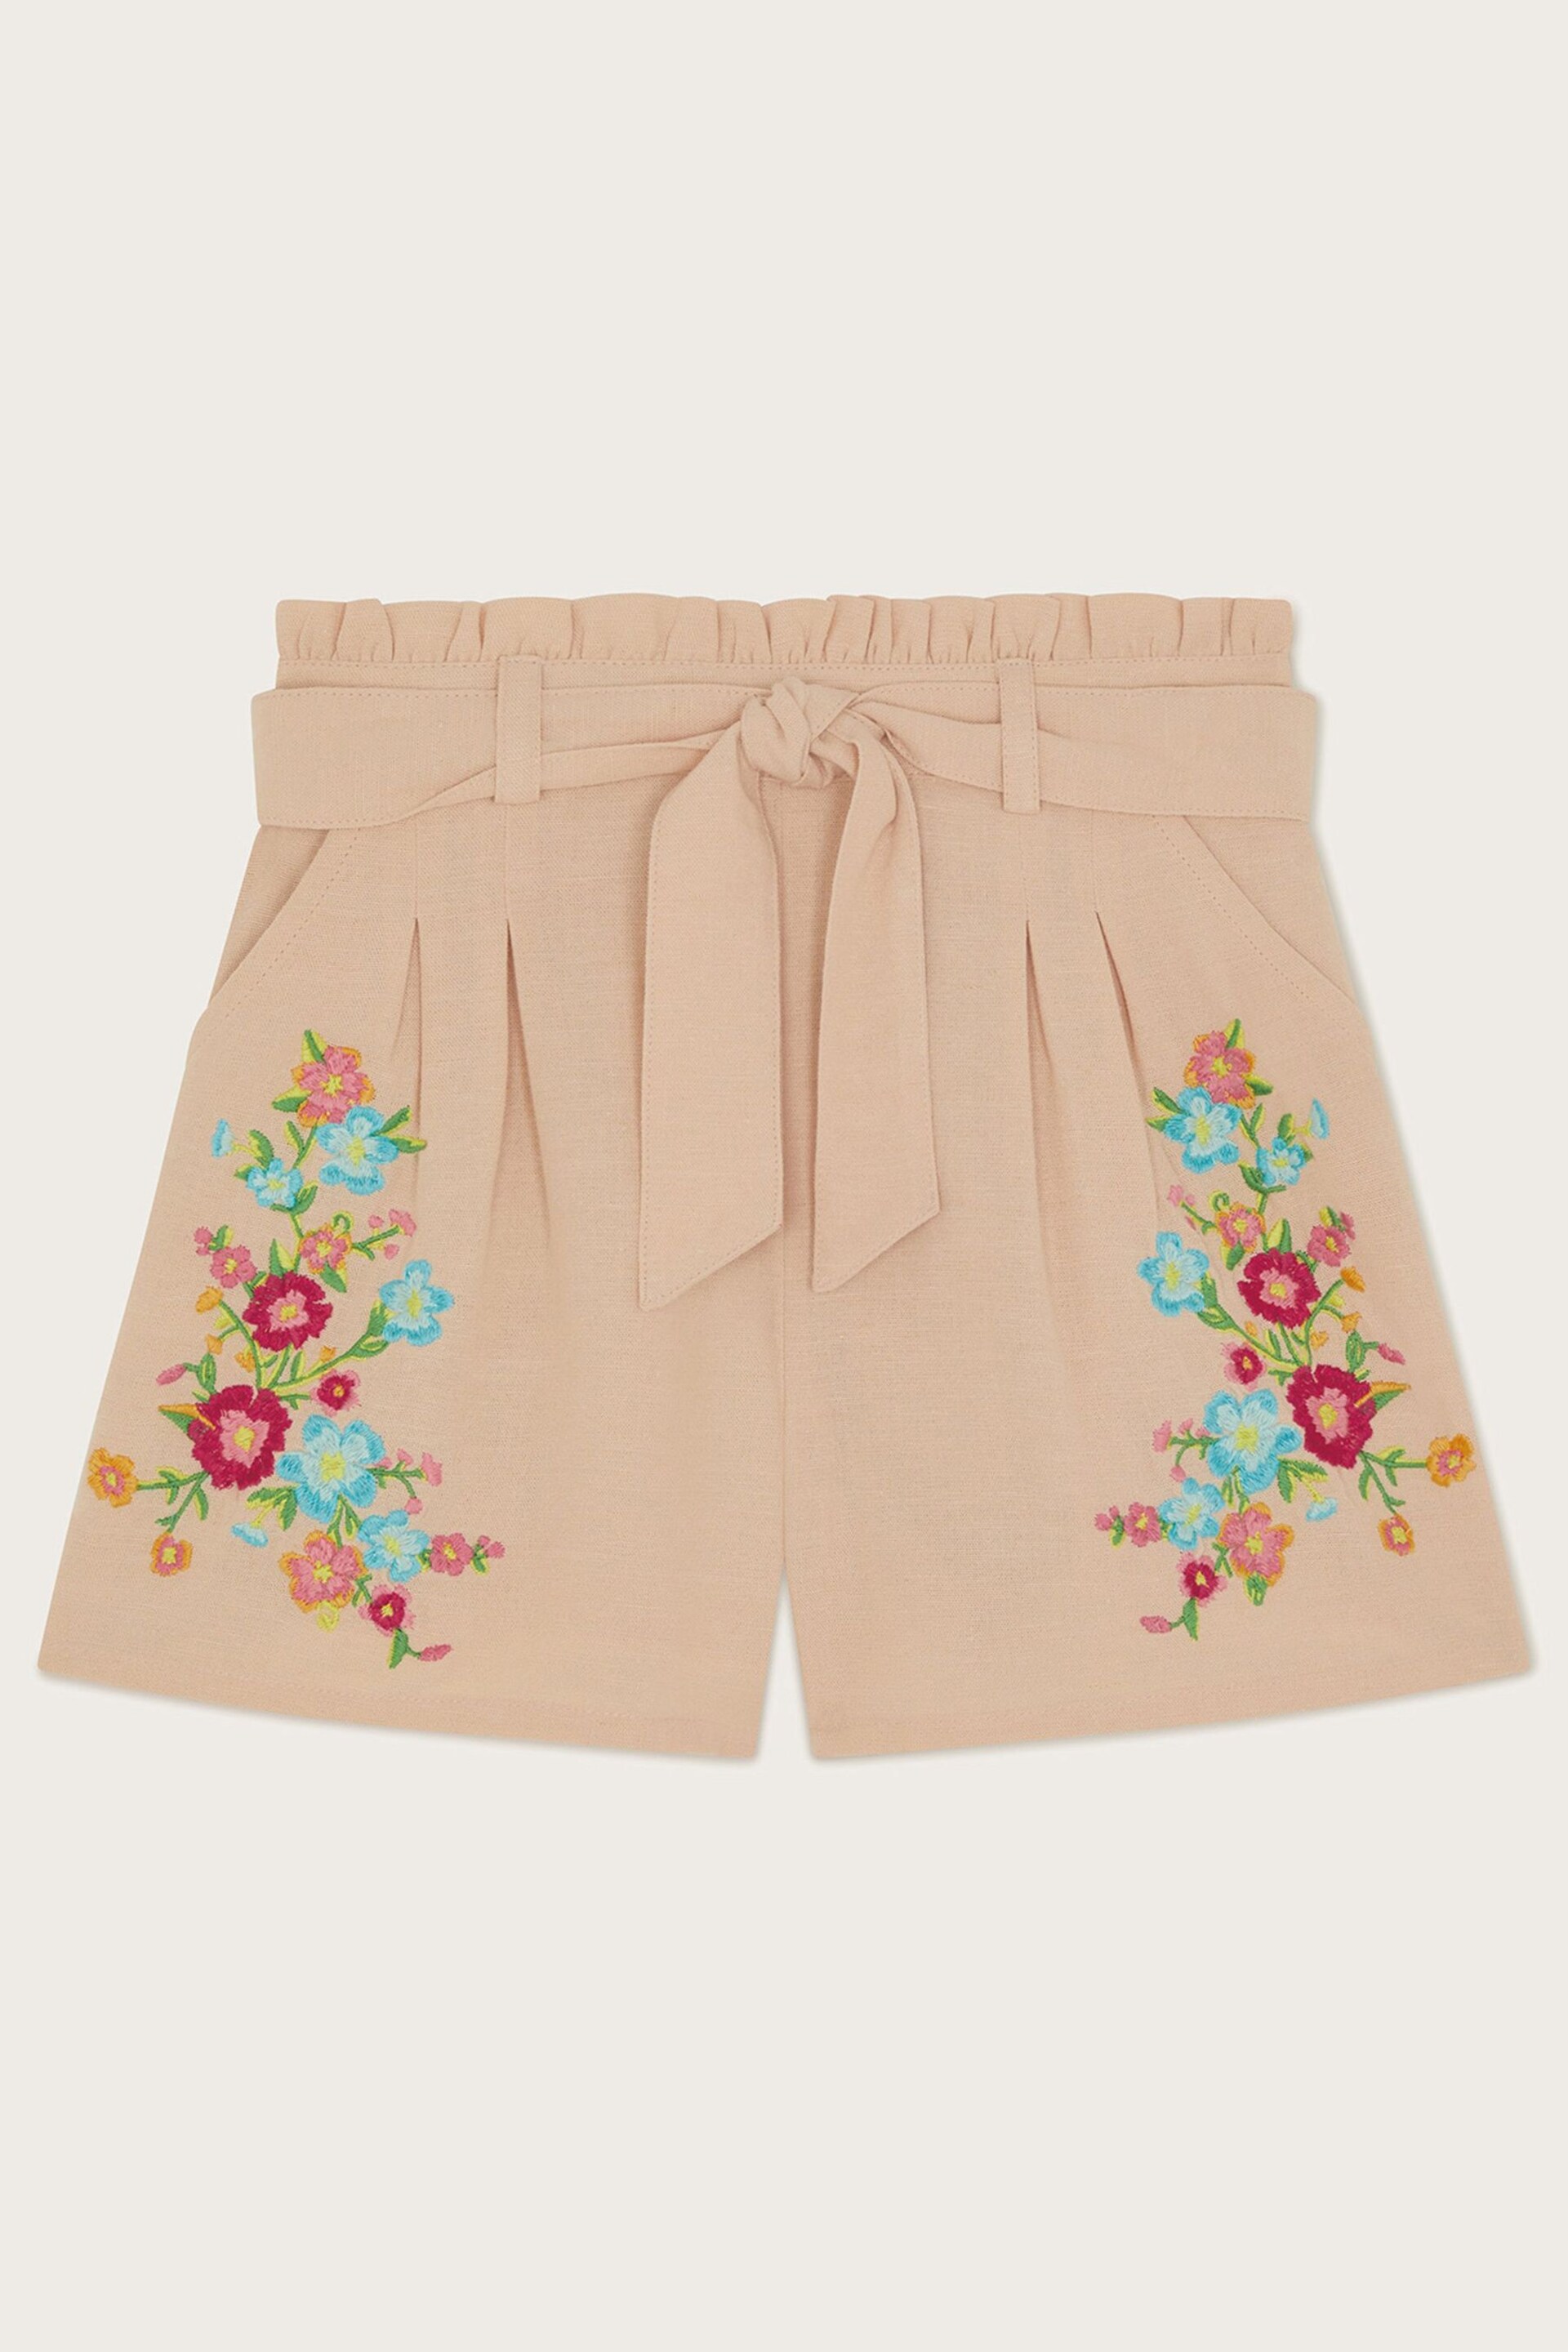 Monsoon Natural Embroidered Paperbag Shorts - Image 1 of 3